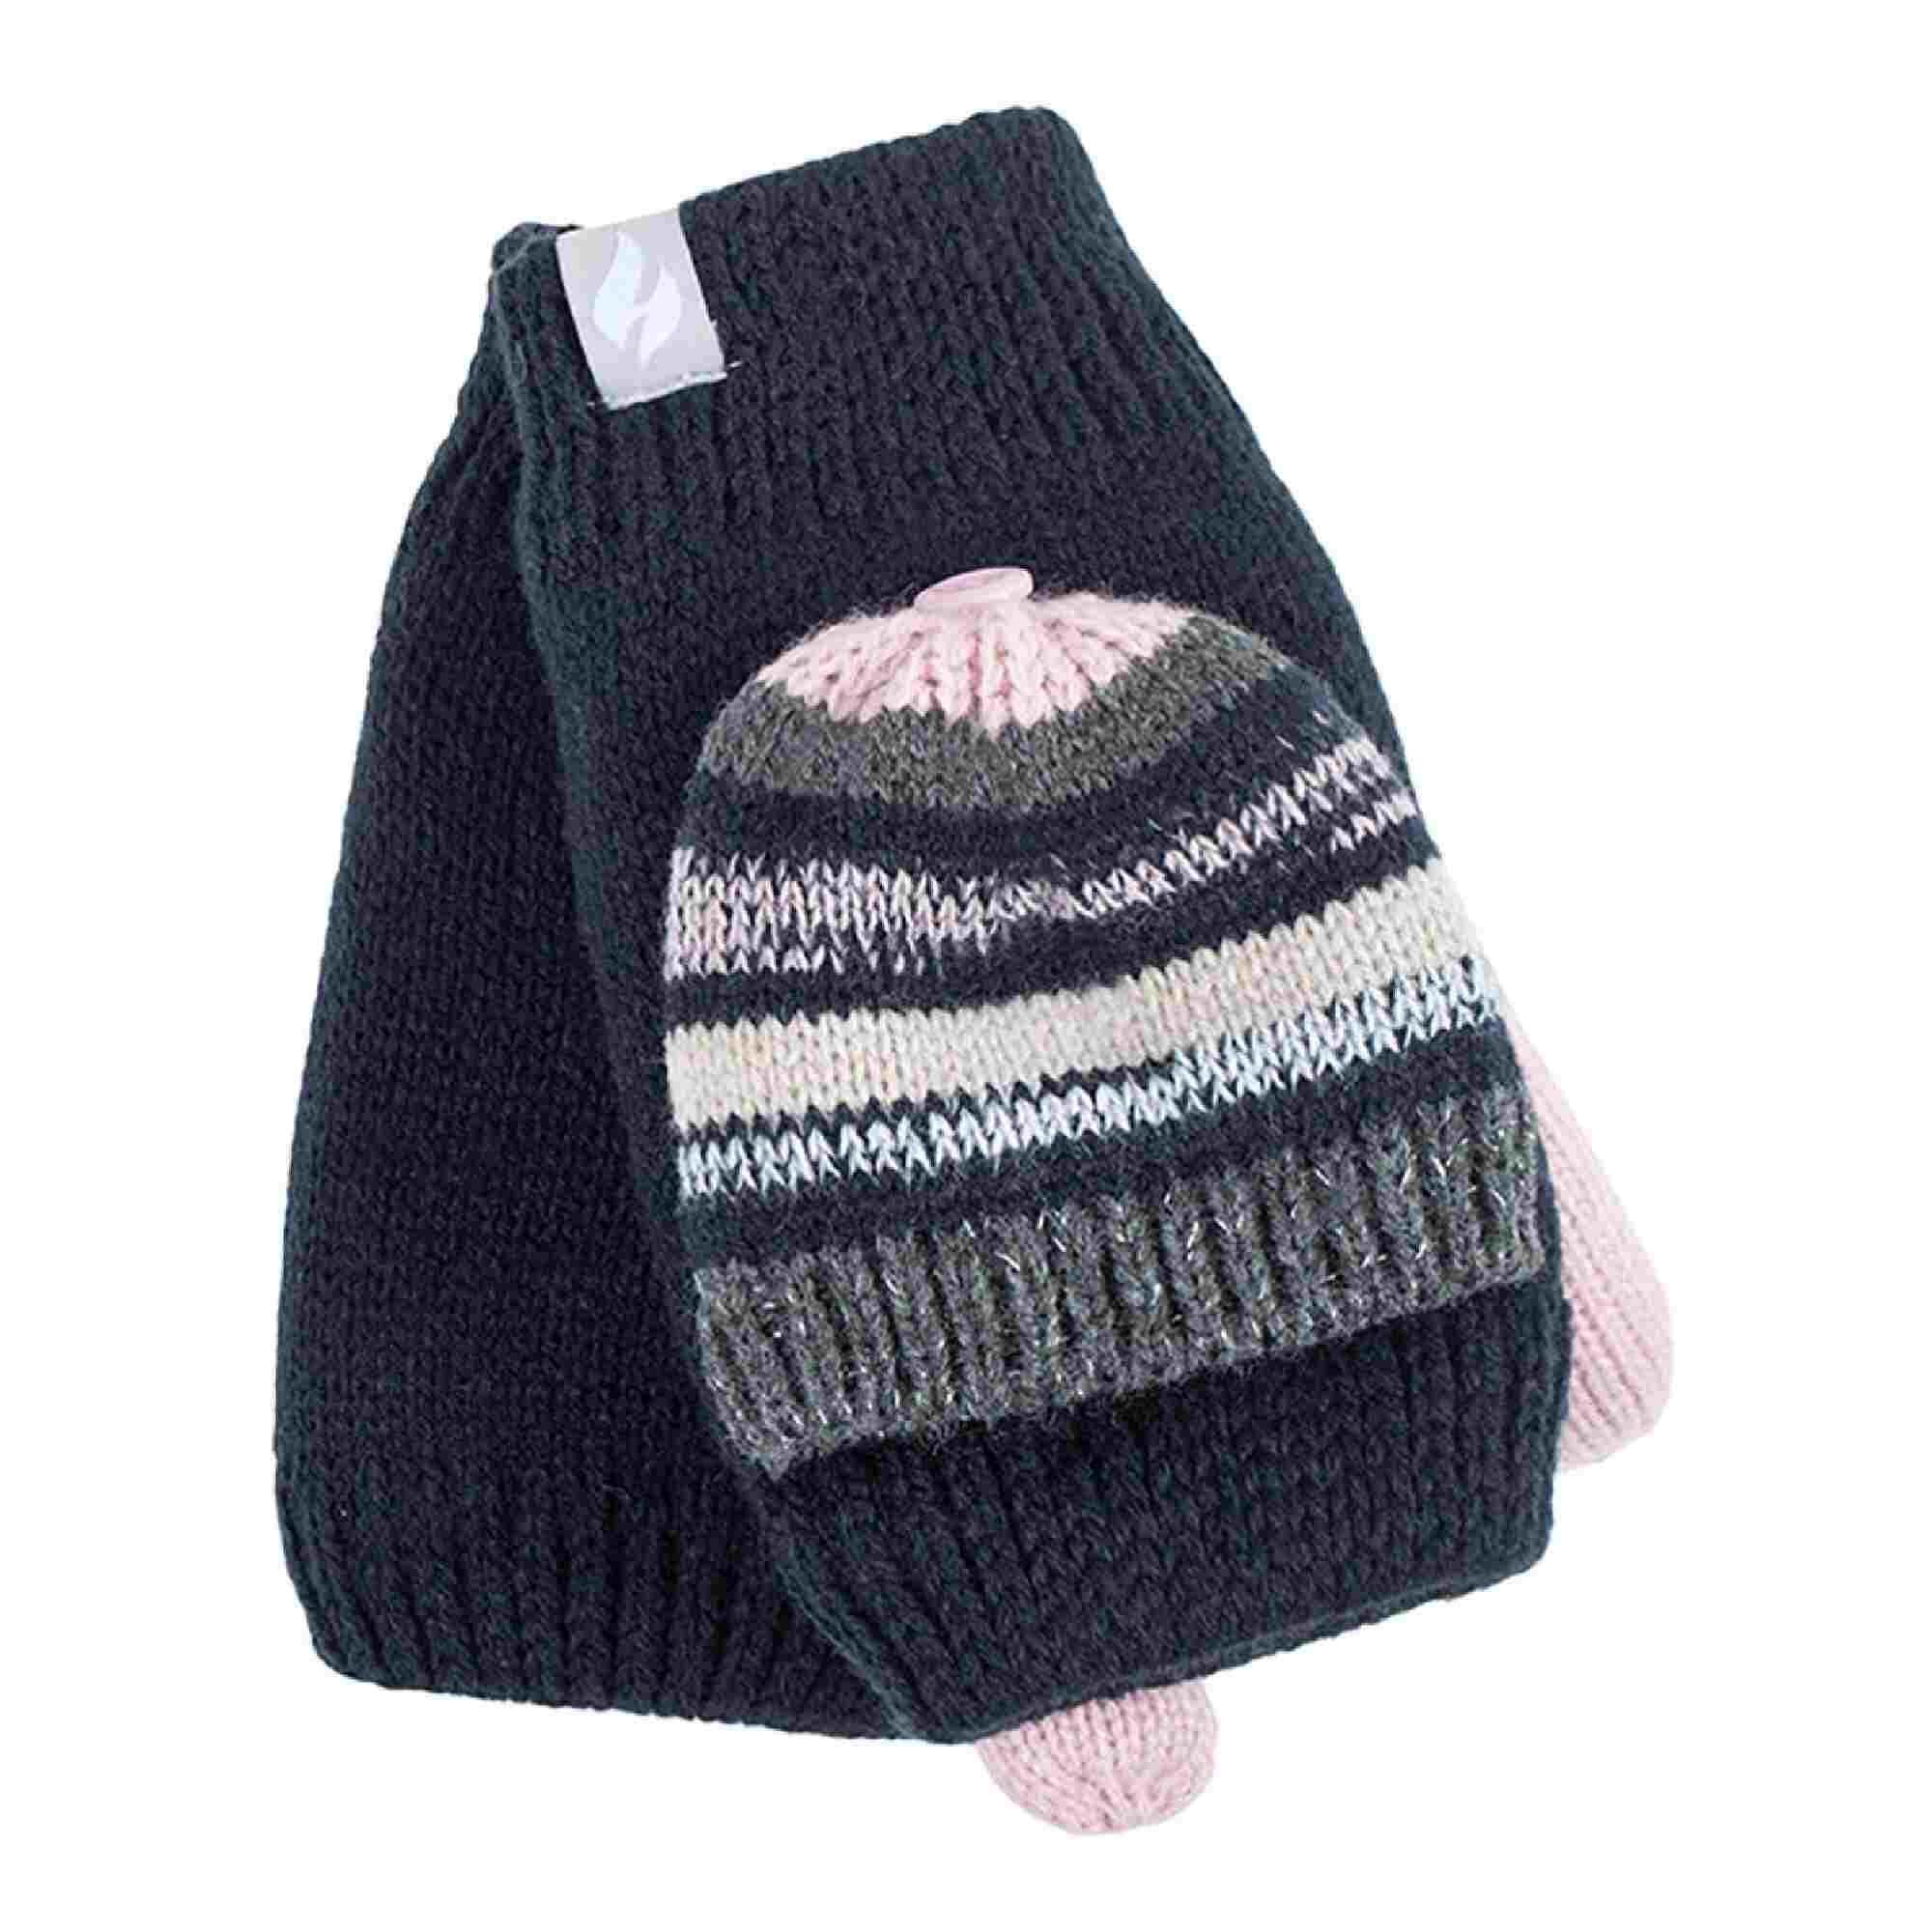 HEAT HOLDERS Ladies Striped Thermal Knitted Converter Mitten Gloves